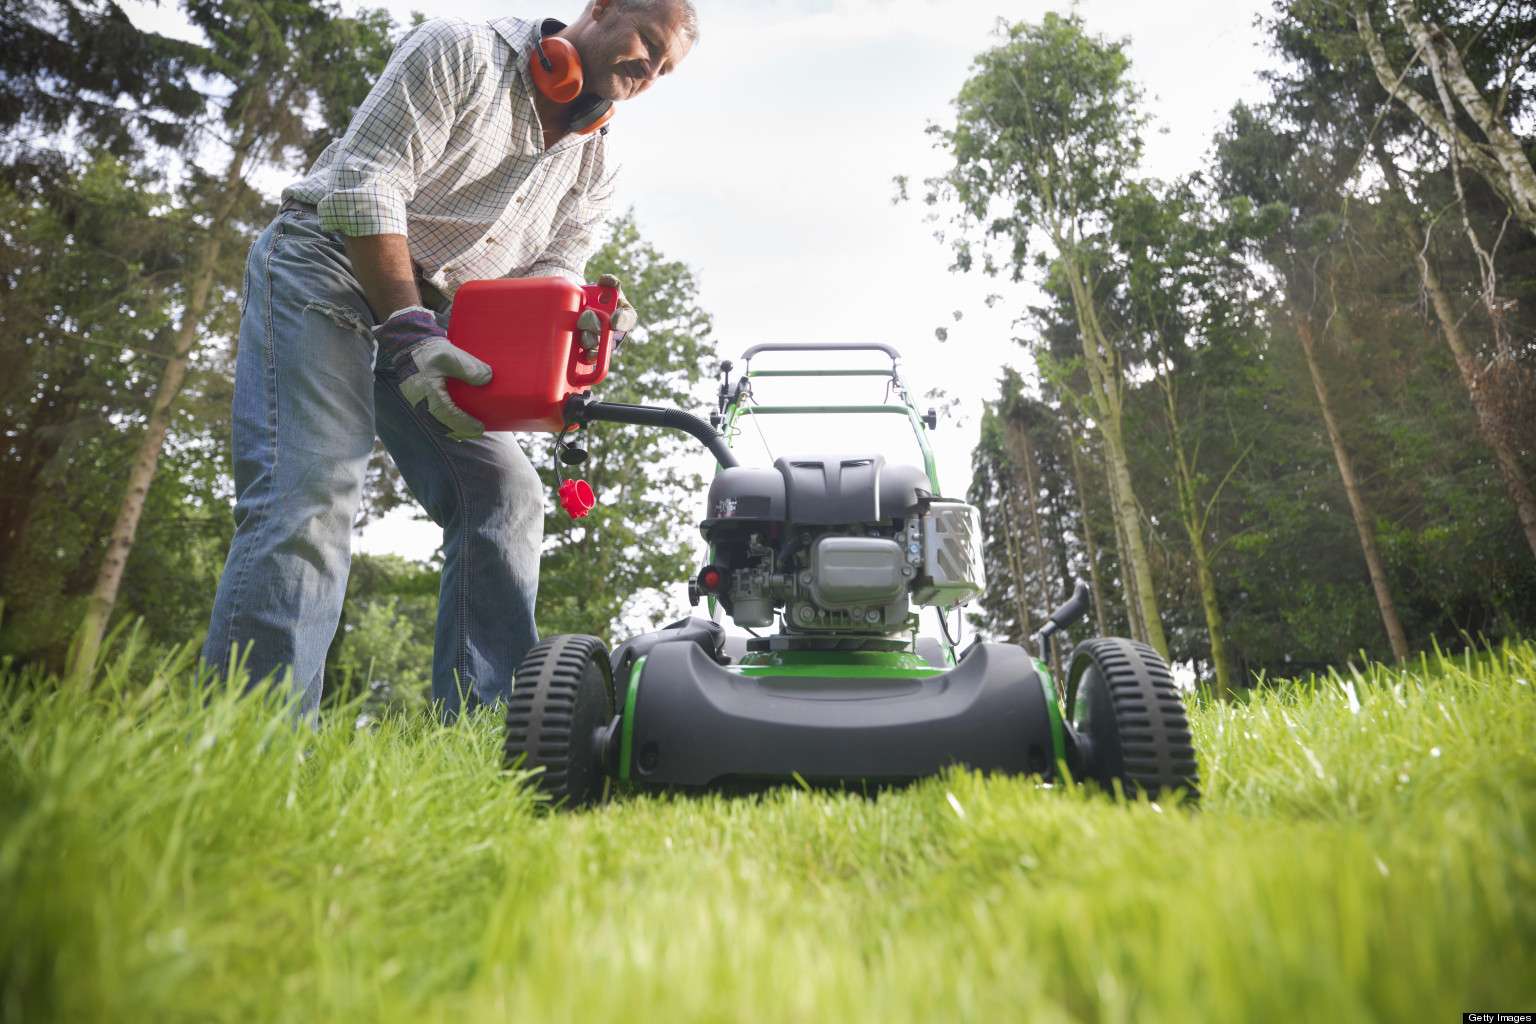 How to Tune Up and Maintain a Lawn Mower